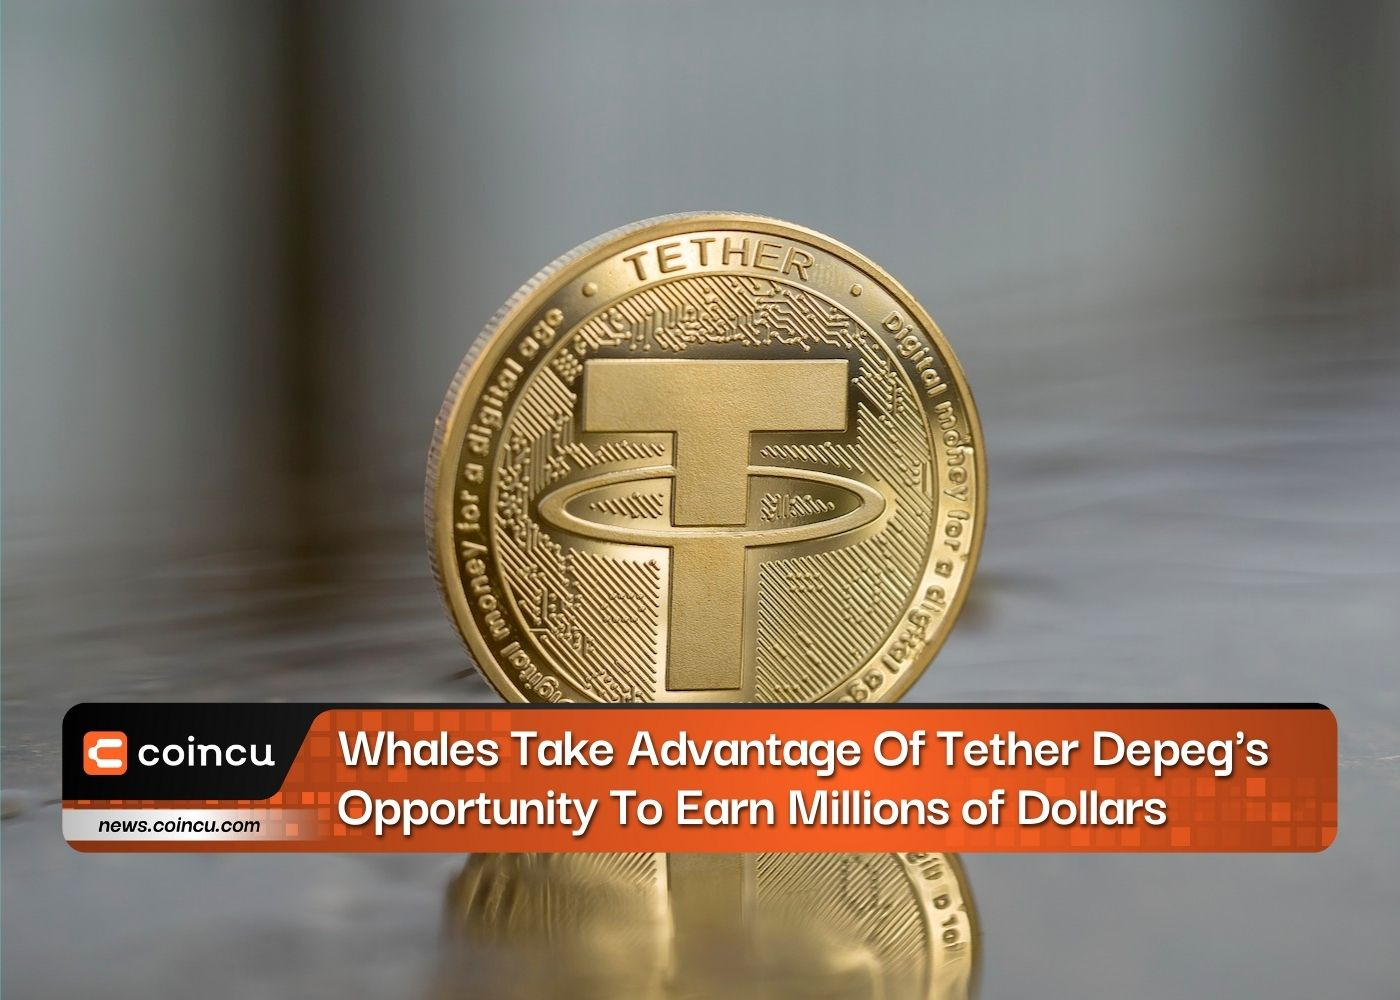 Whales Take Advantage Of Tether Depeg's Opportunity To Earn Millions of Dollars